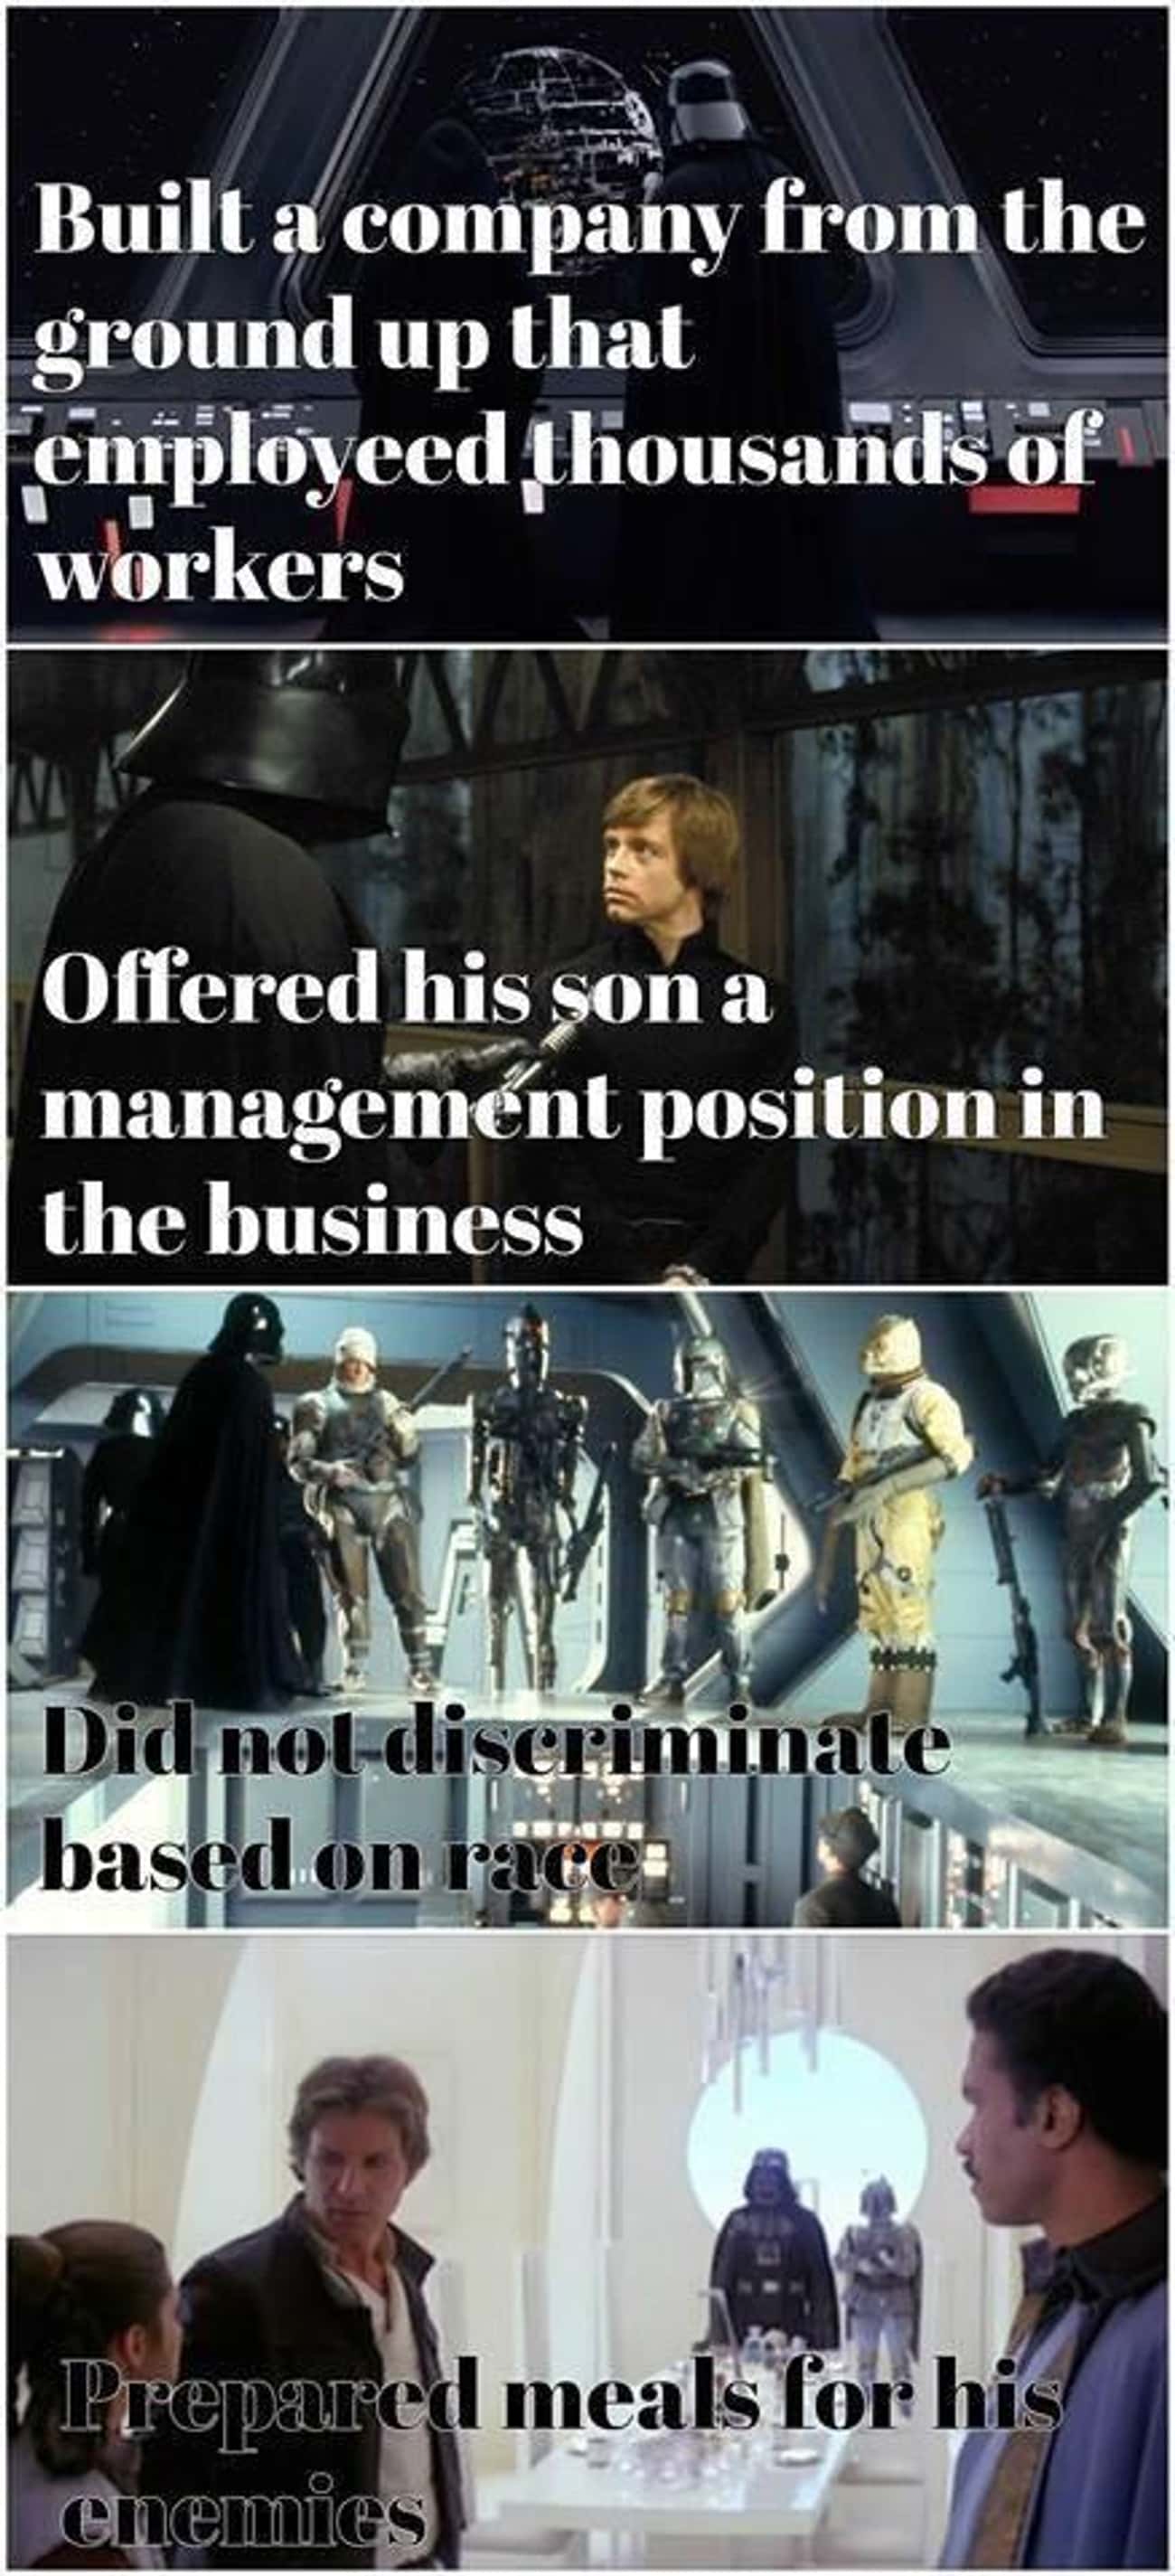 Lord Vader Is A Generous Leader